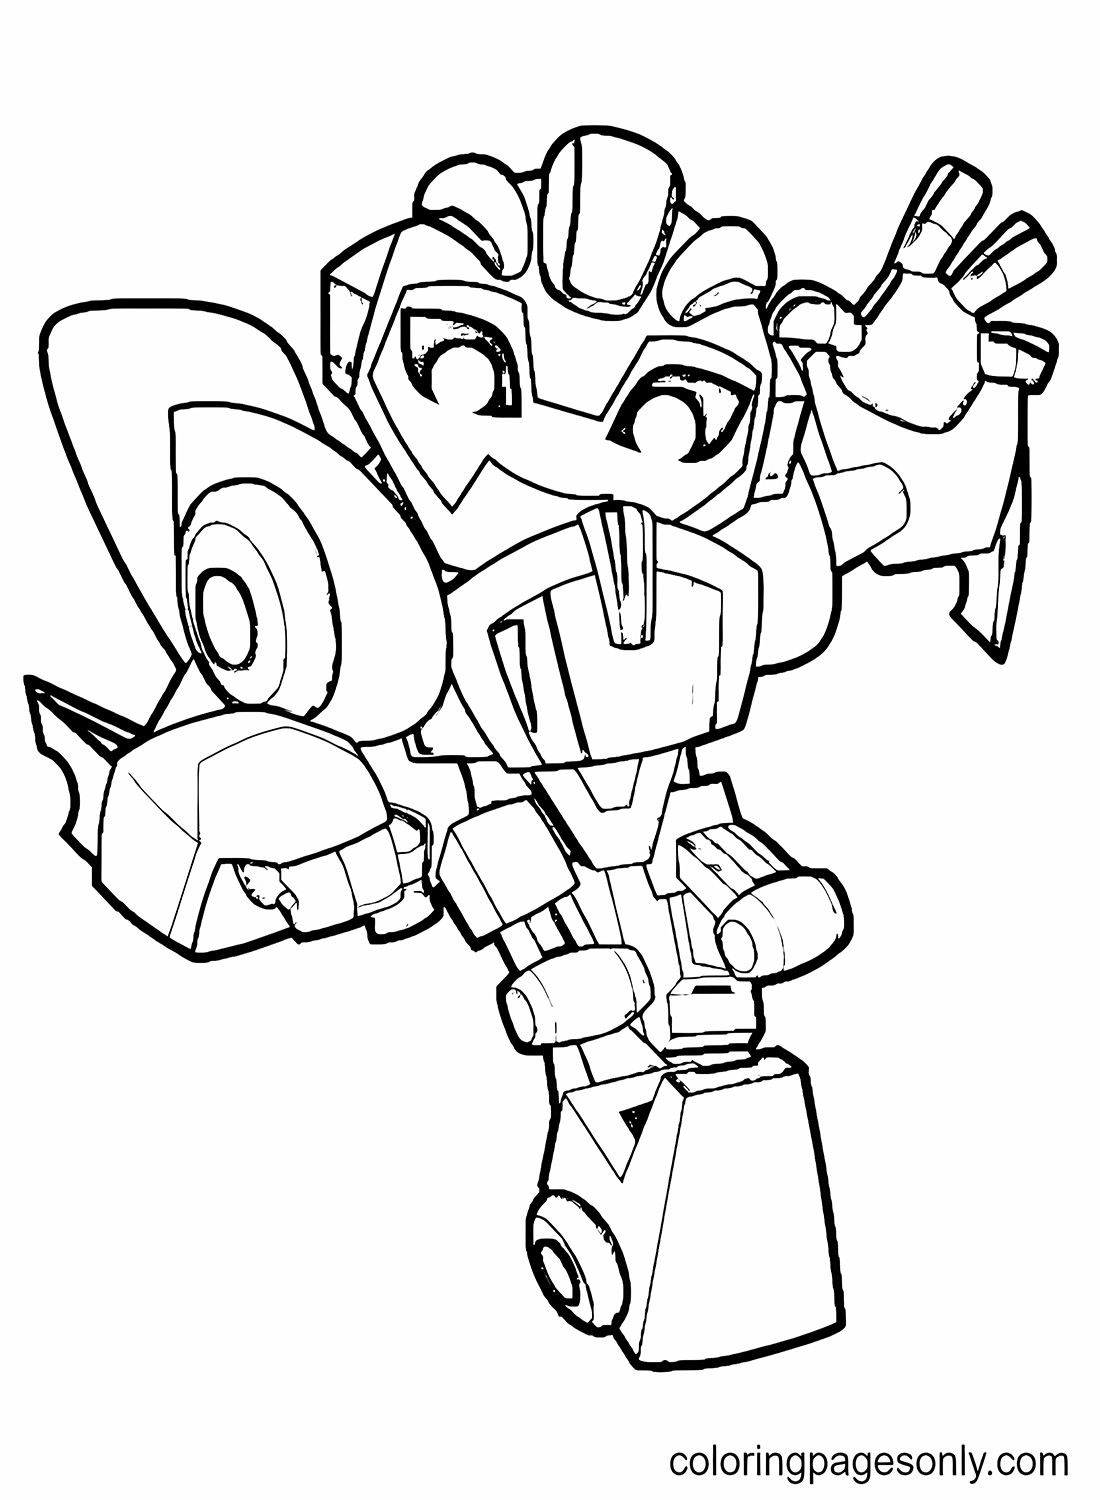 Bumblebee from Transformers Movie Coloring Pages